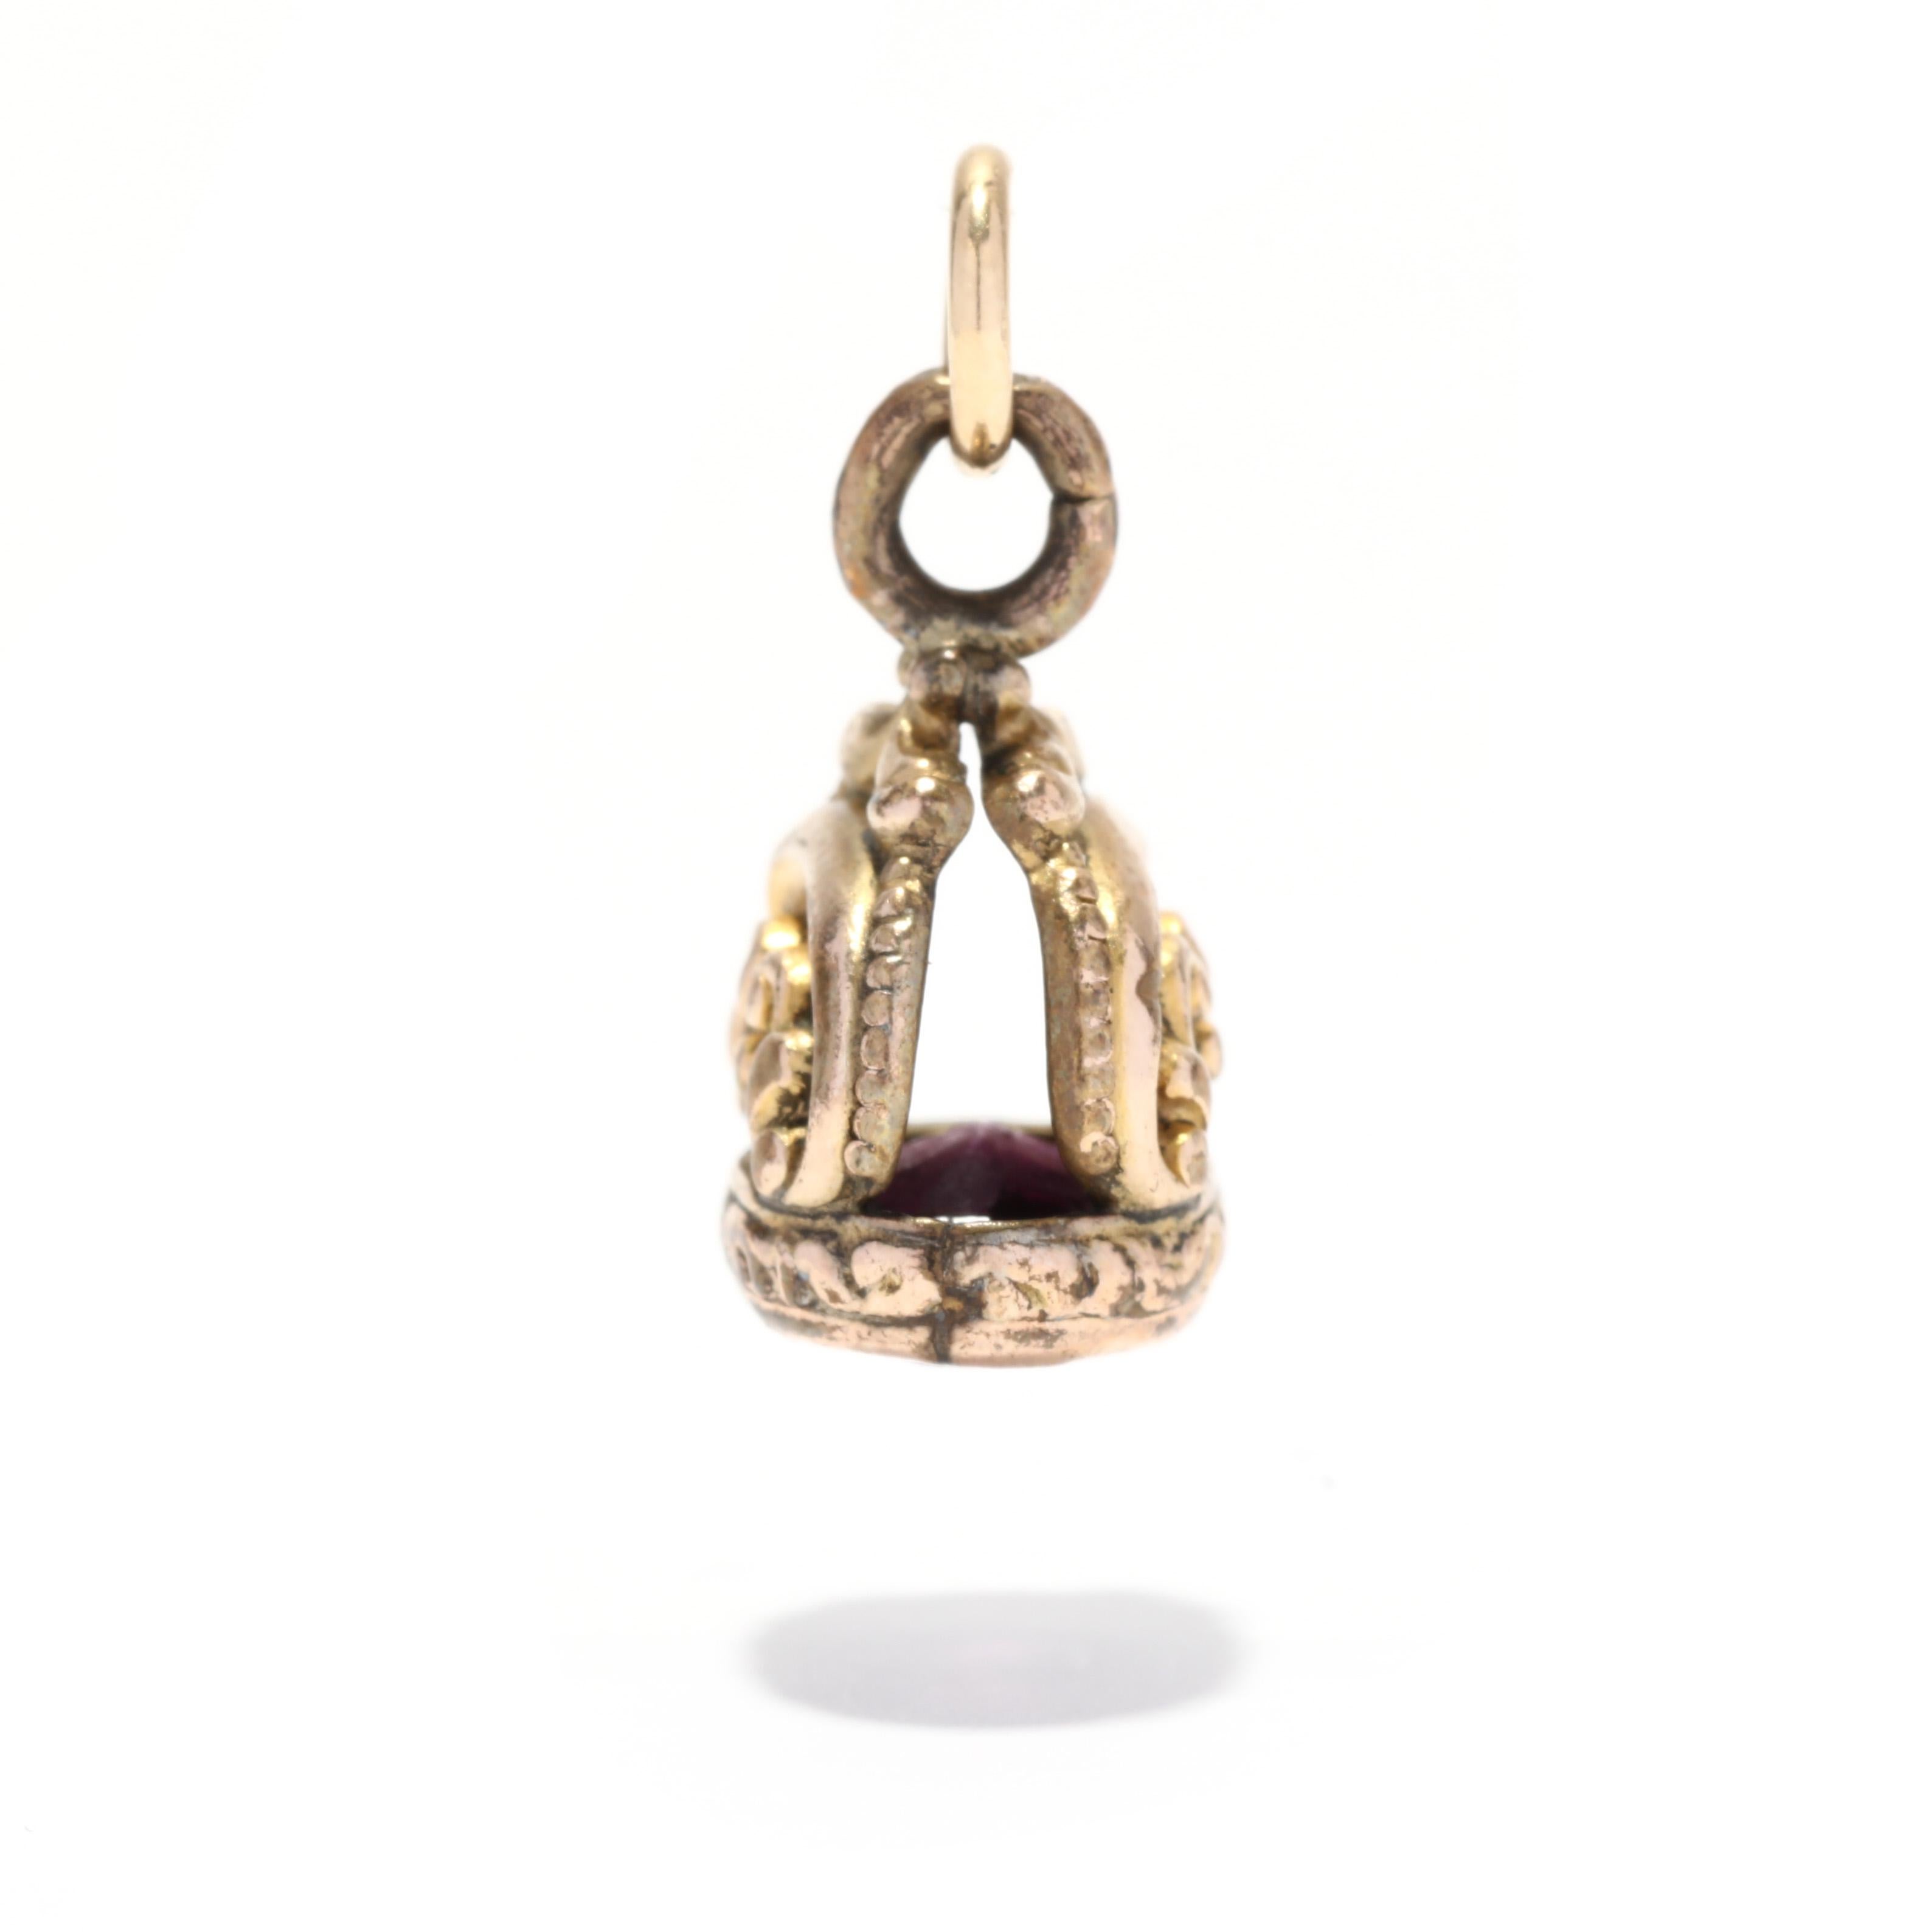 A victorian gold filled purple stone watch fob charm. This small charm features an ornately engraved scroll design with a bezel set purple stone and a thin bail. Please note that this stone has a large chip but is stable in the mounting.

Length: